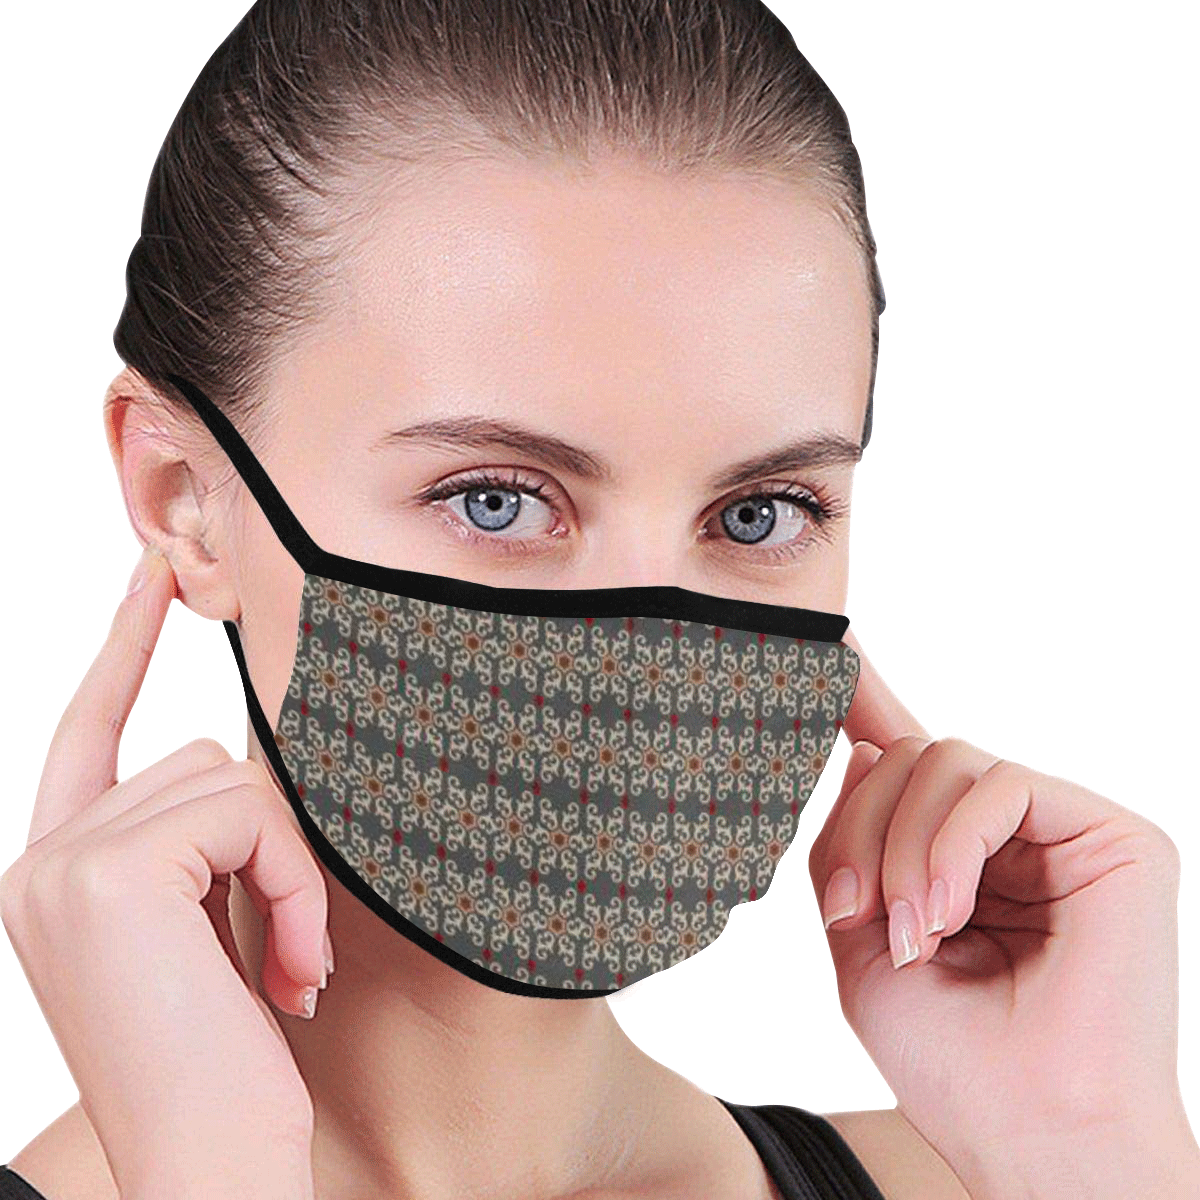 black and beige pattern Mouth Mask